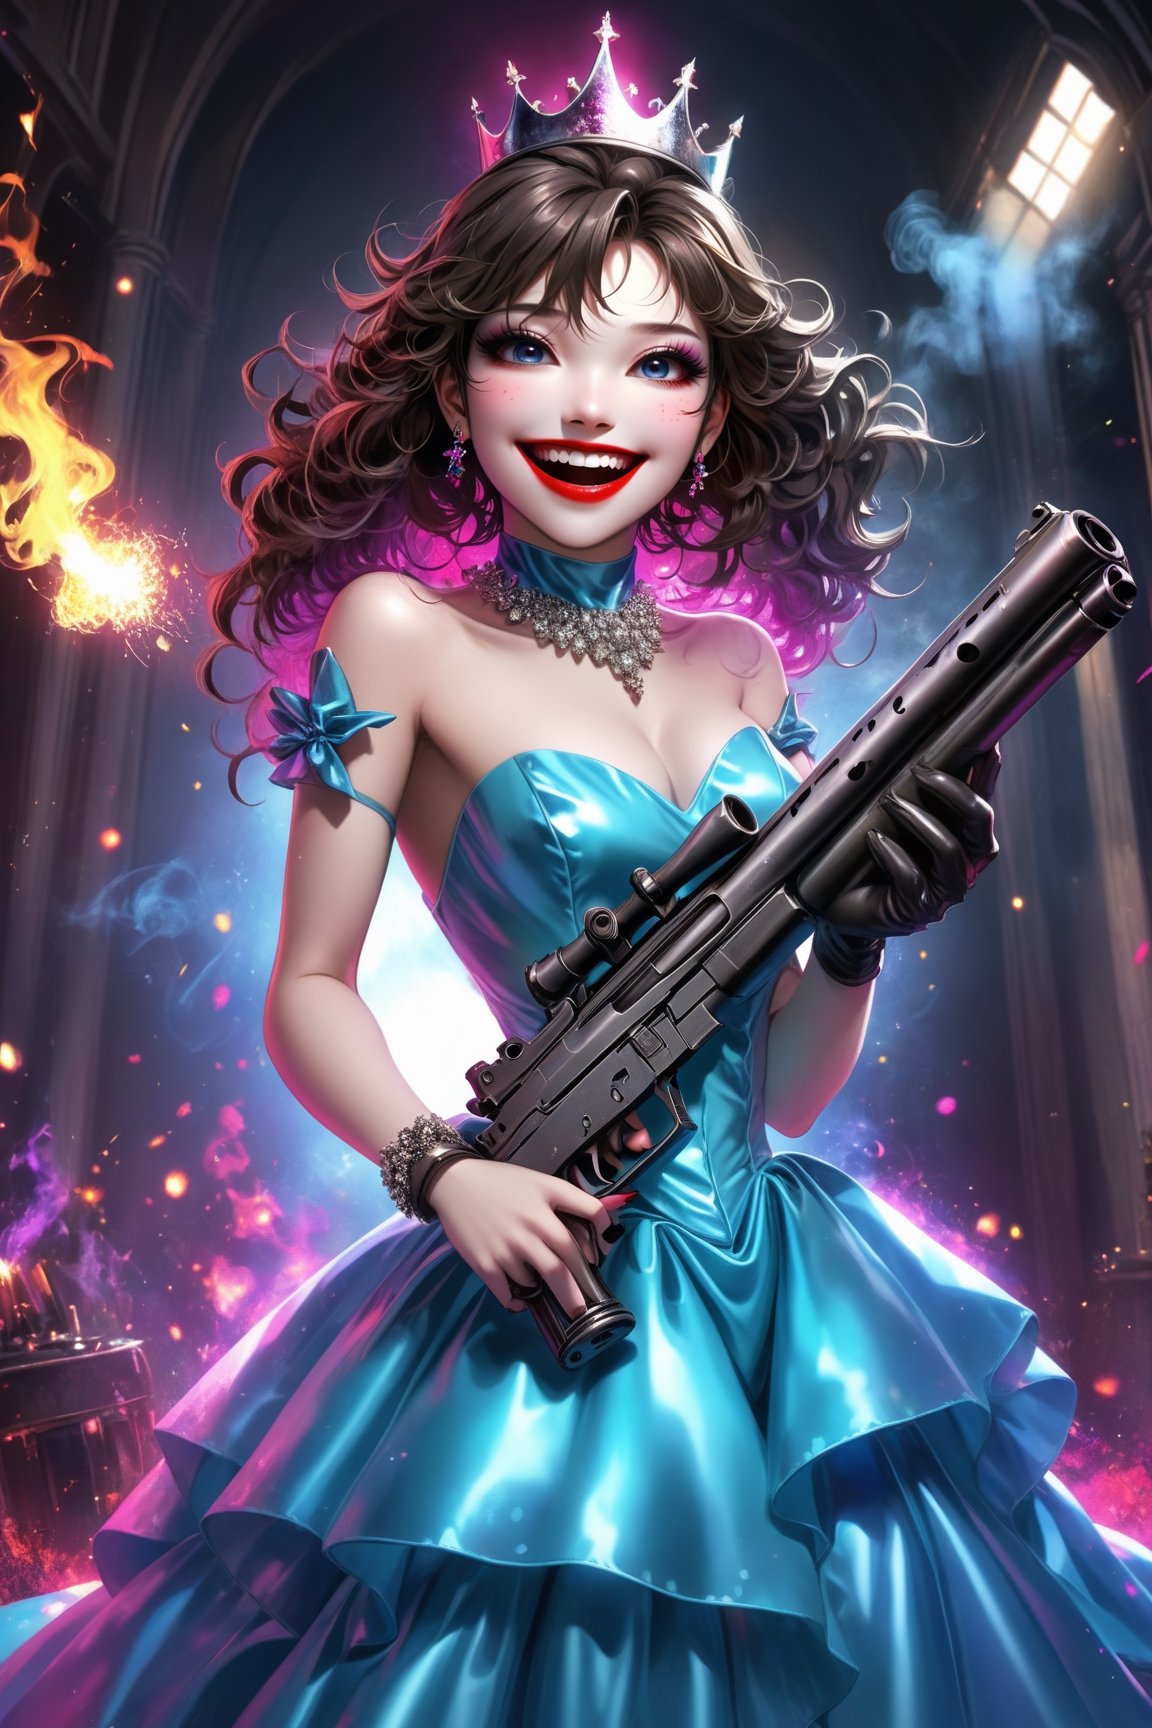 Hiro Crazy Dimension, a princess in the prom gown, with a gun and bold make up, smile crazy, fire, bullet, dark room, dinner